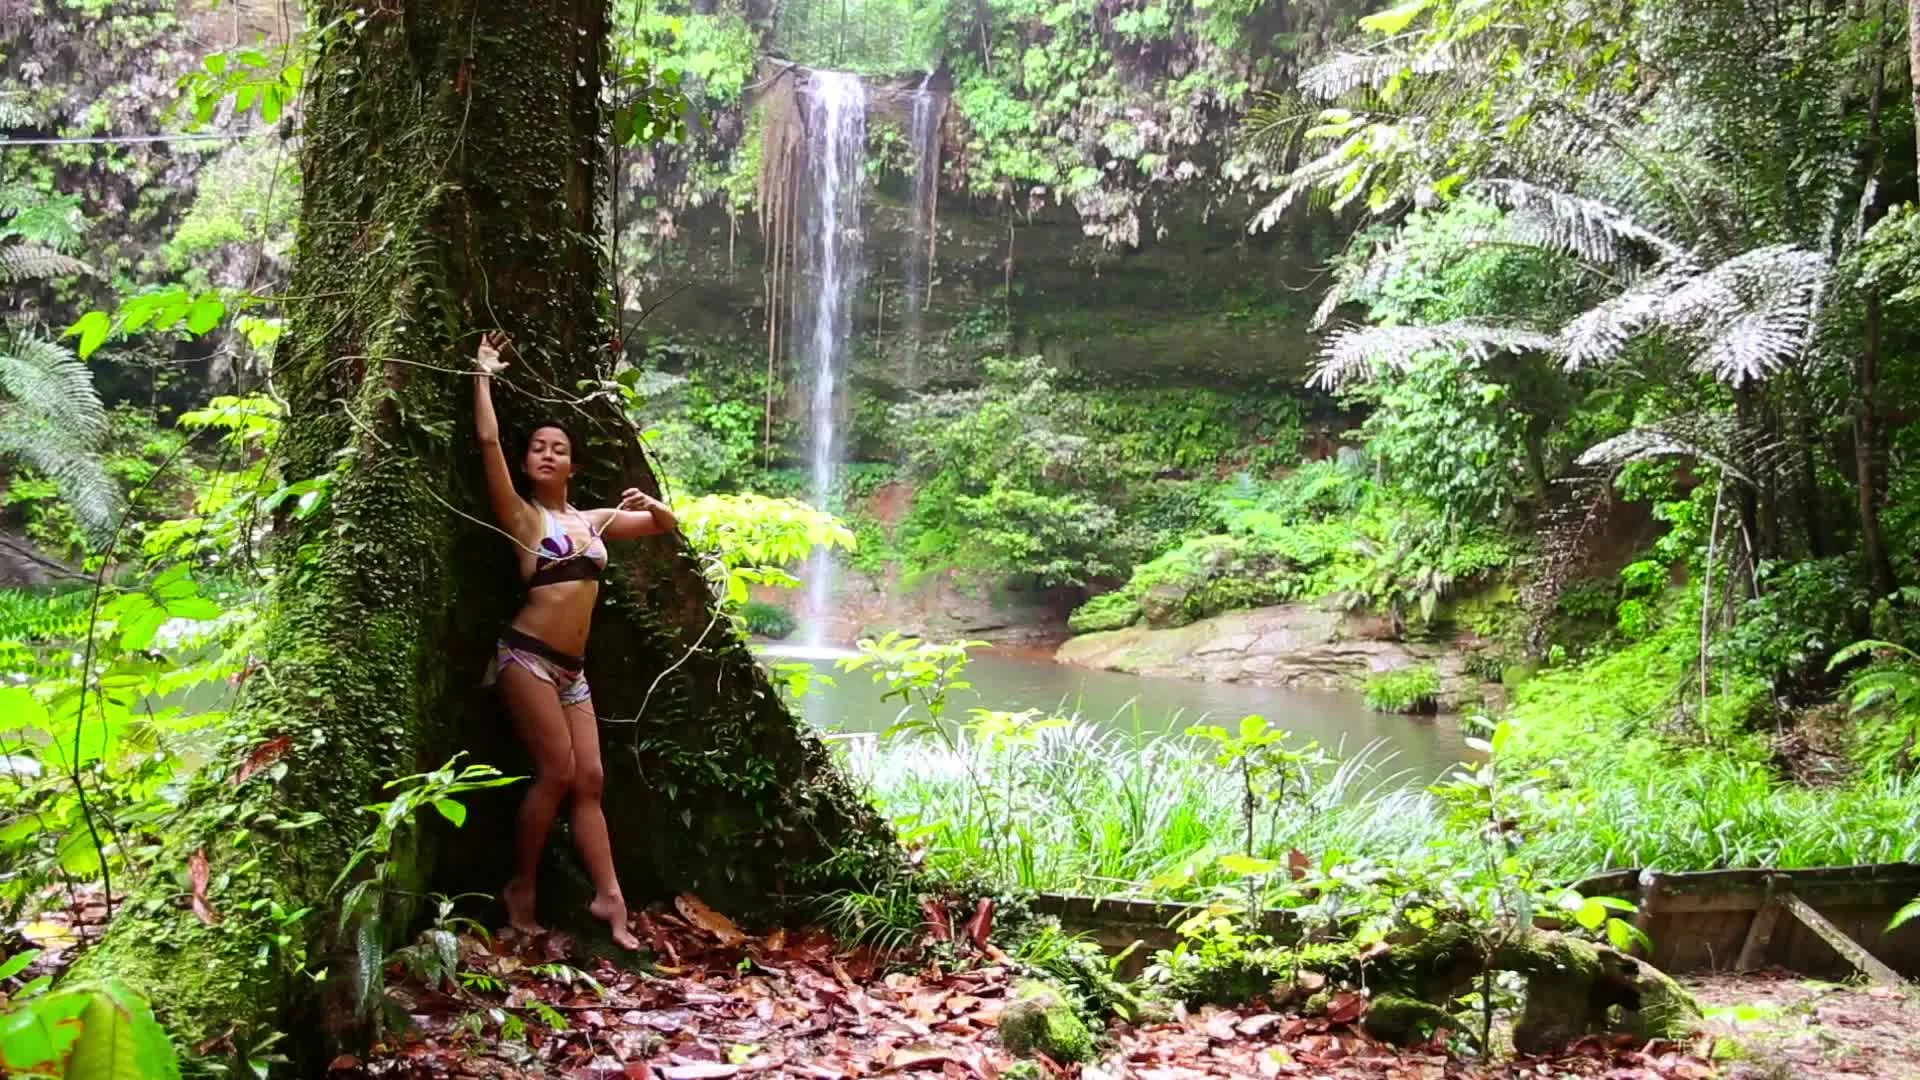 Video Sexy Girl Leaning Huge Tree In Rainforest Background Waterfall ~ 12170214